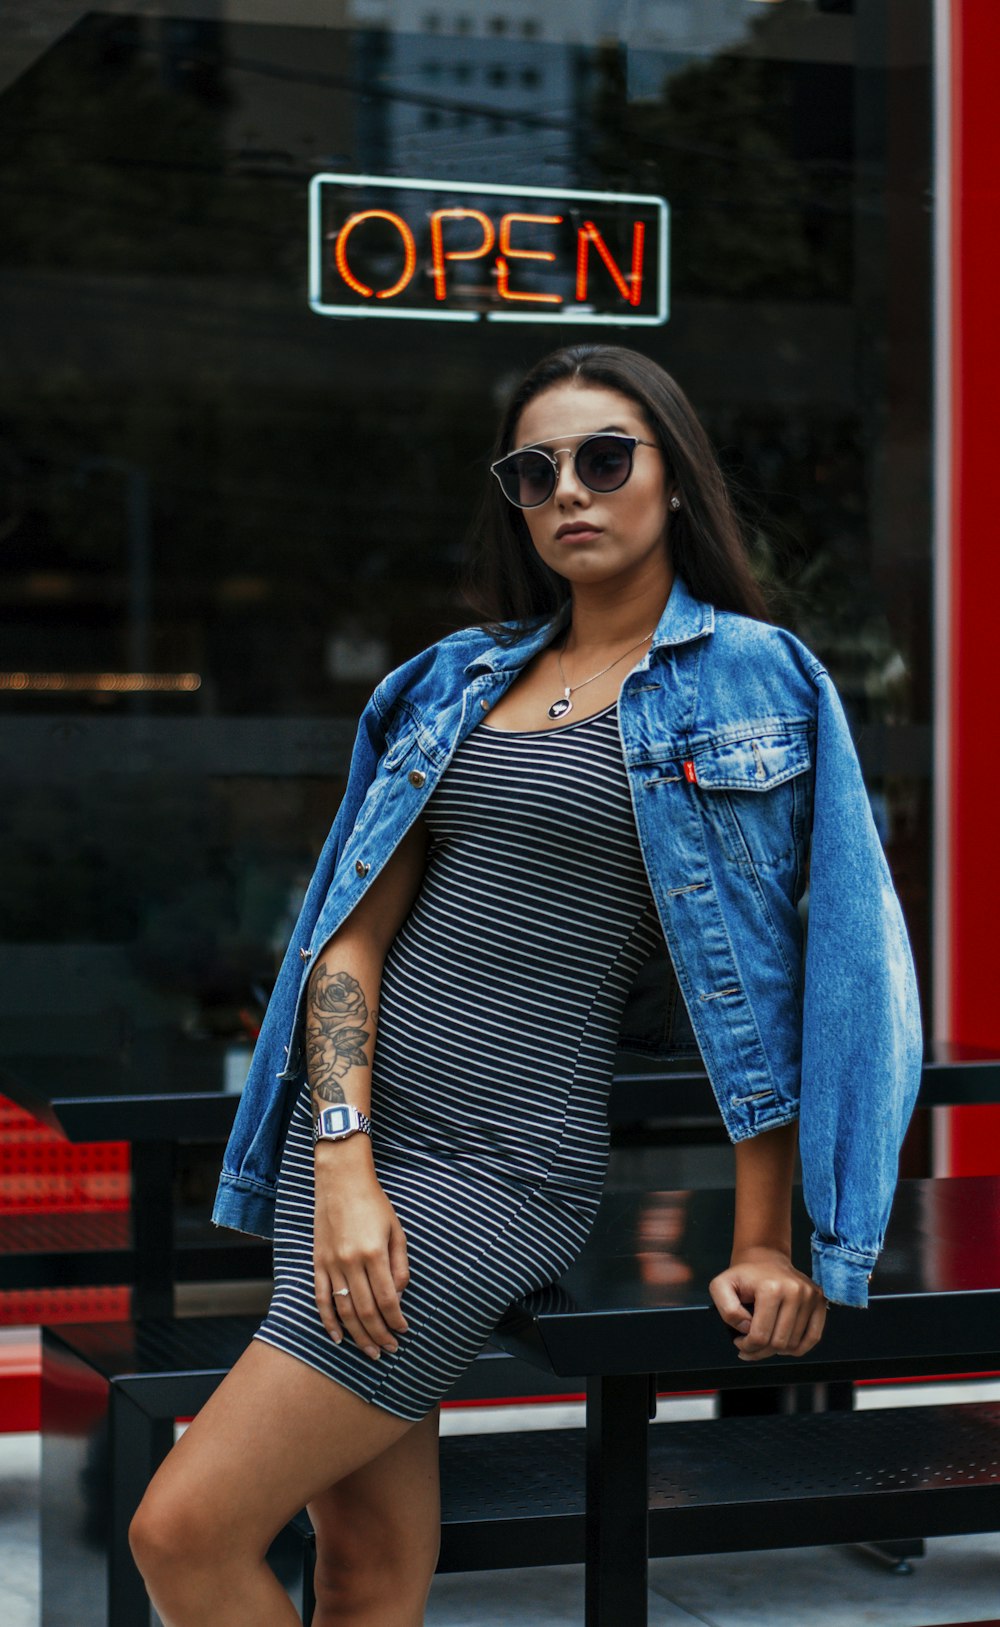 woman in black and white striped shirt and blue denim jacket wearing black sunglasses